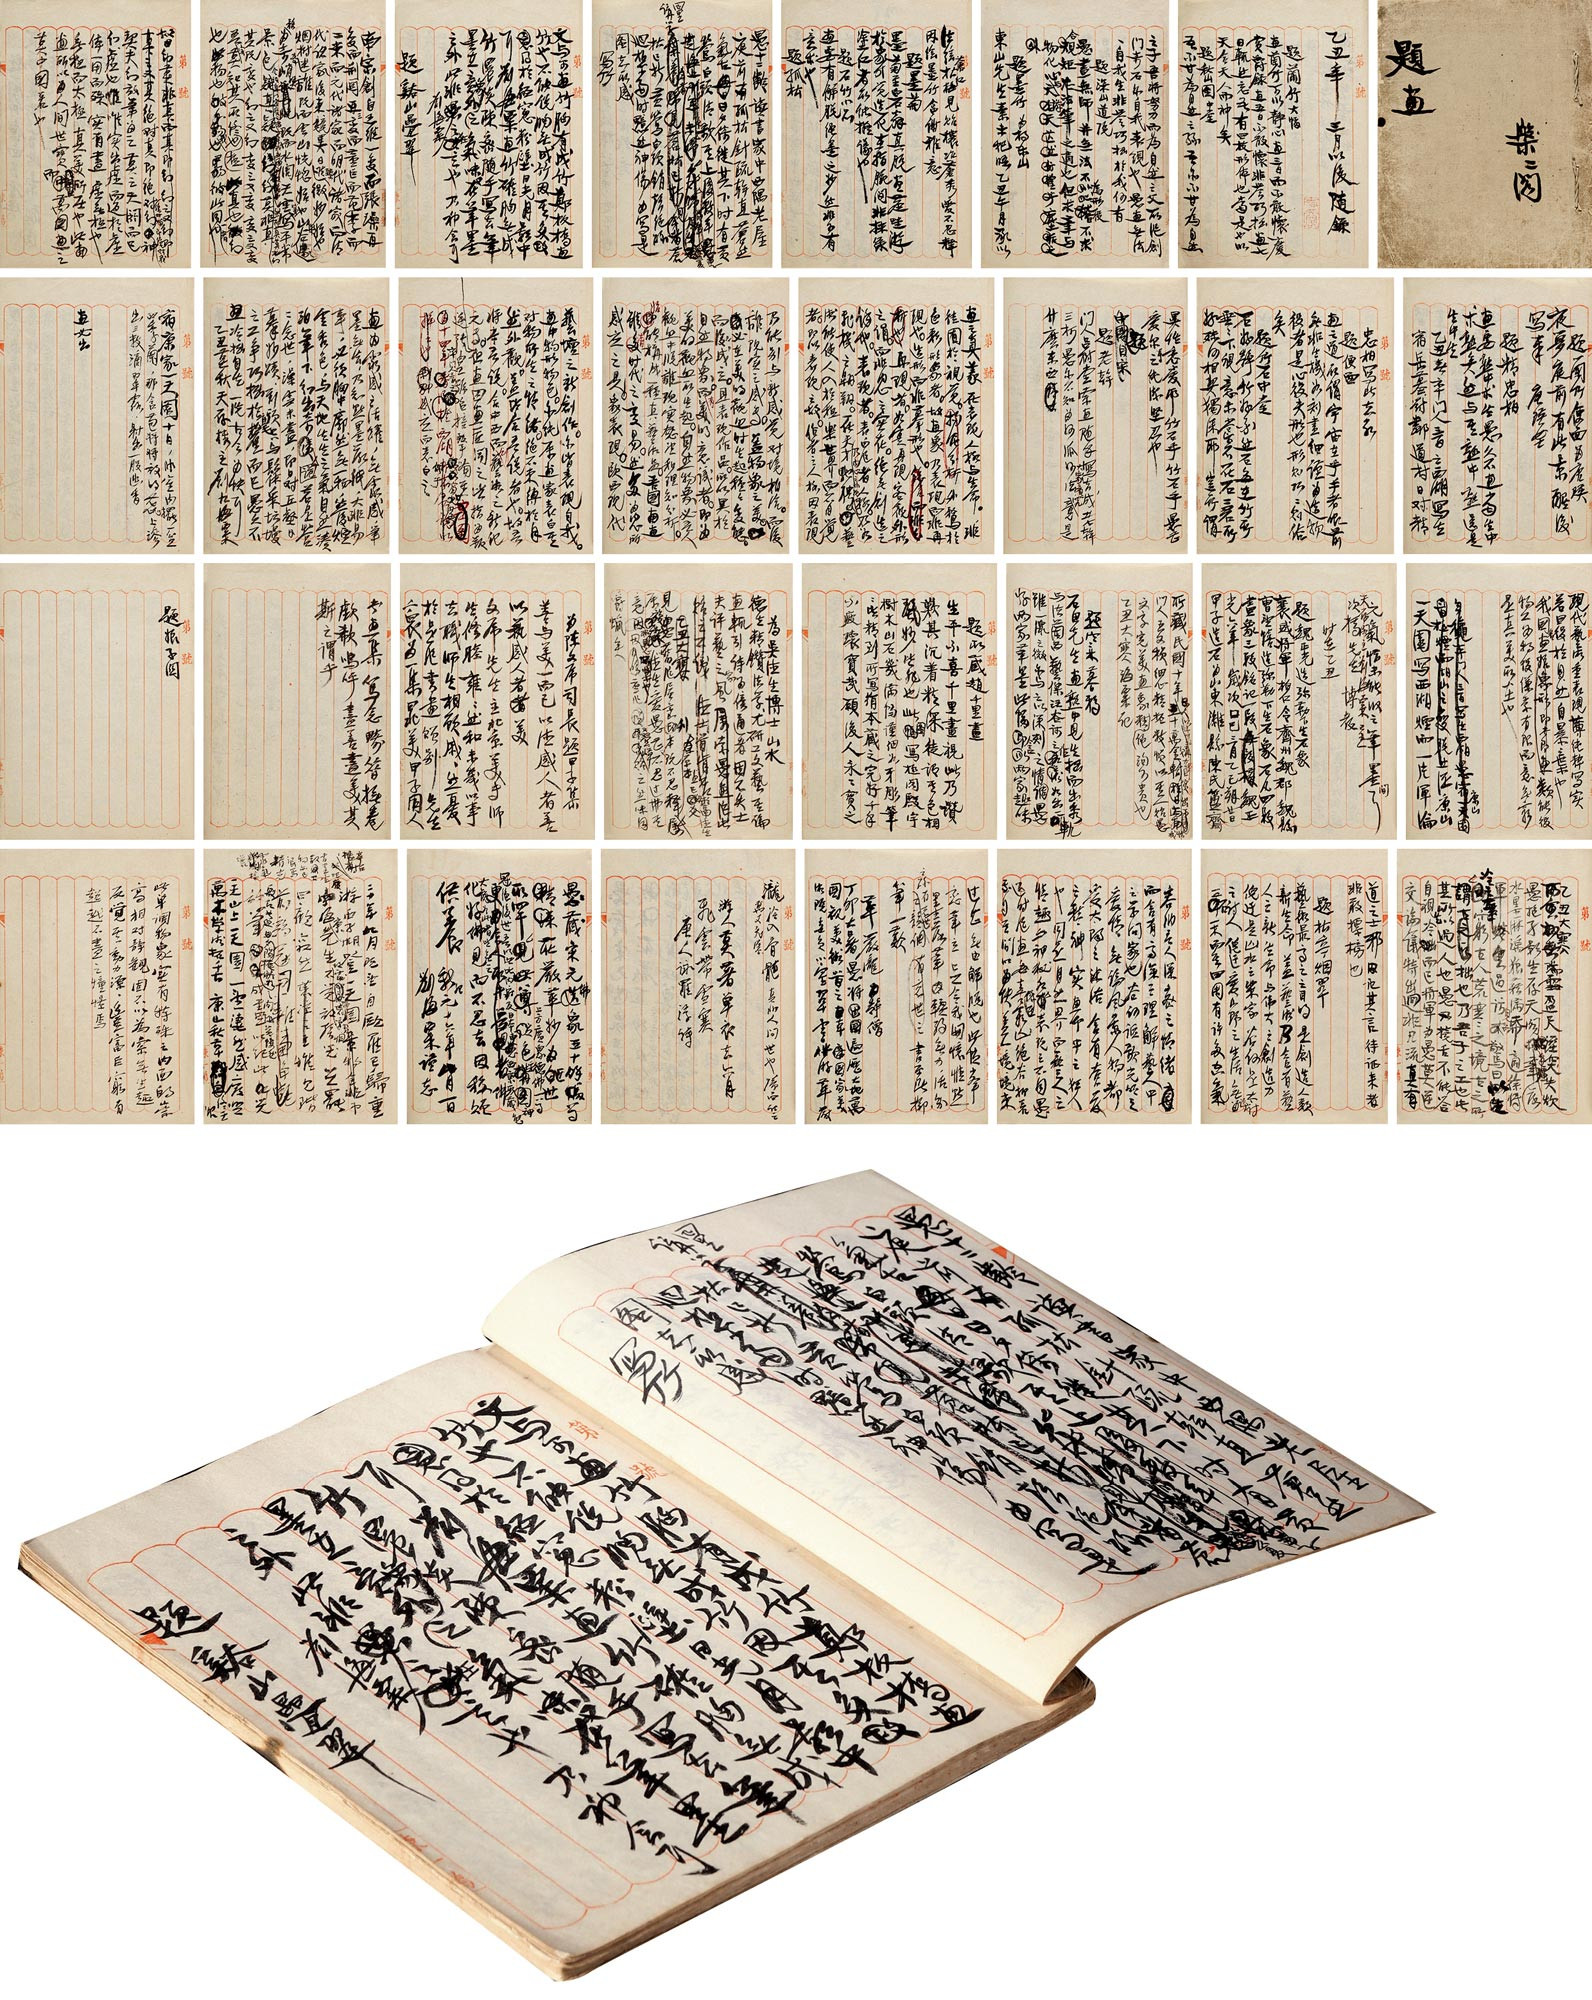 The Poem and Painting of Pan Pan Pavilion in Liu Haisu’s handwriting in 1925 intotal 31 pages in 1 volume